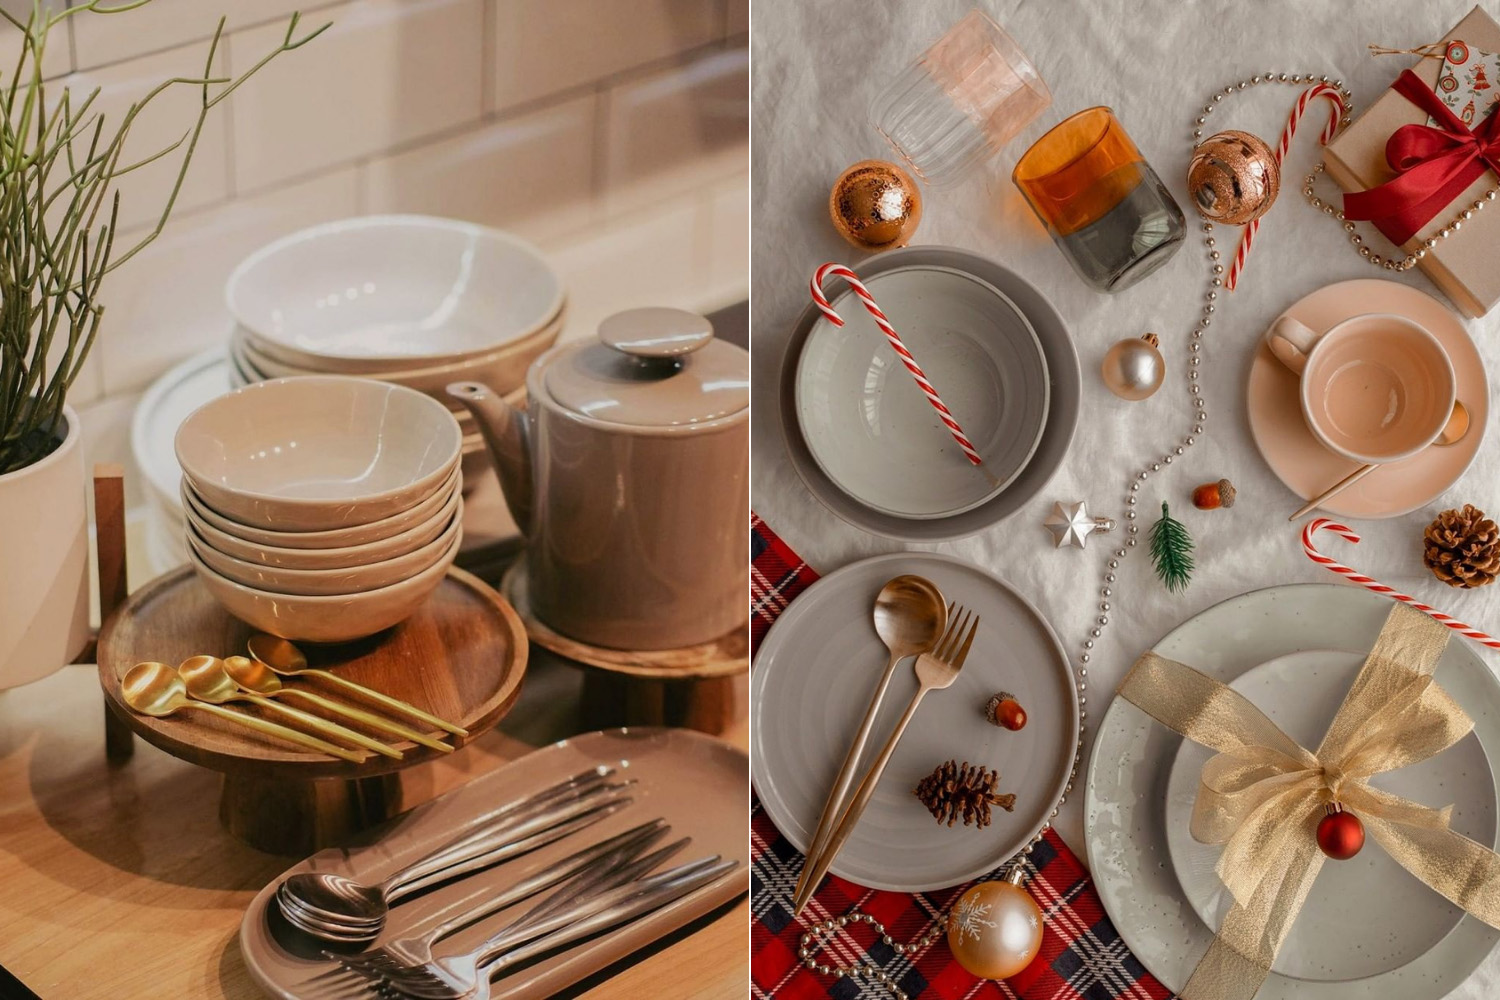 6 Christmas Gift Ideas Below $20 To Give Homeowner Singaporeans A Cosy, IG-Worthy Space - Flitn and Barton cutlery